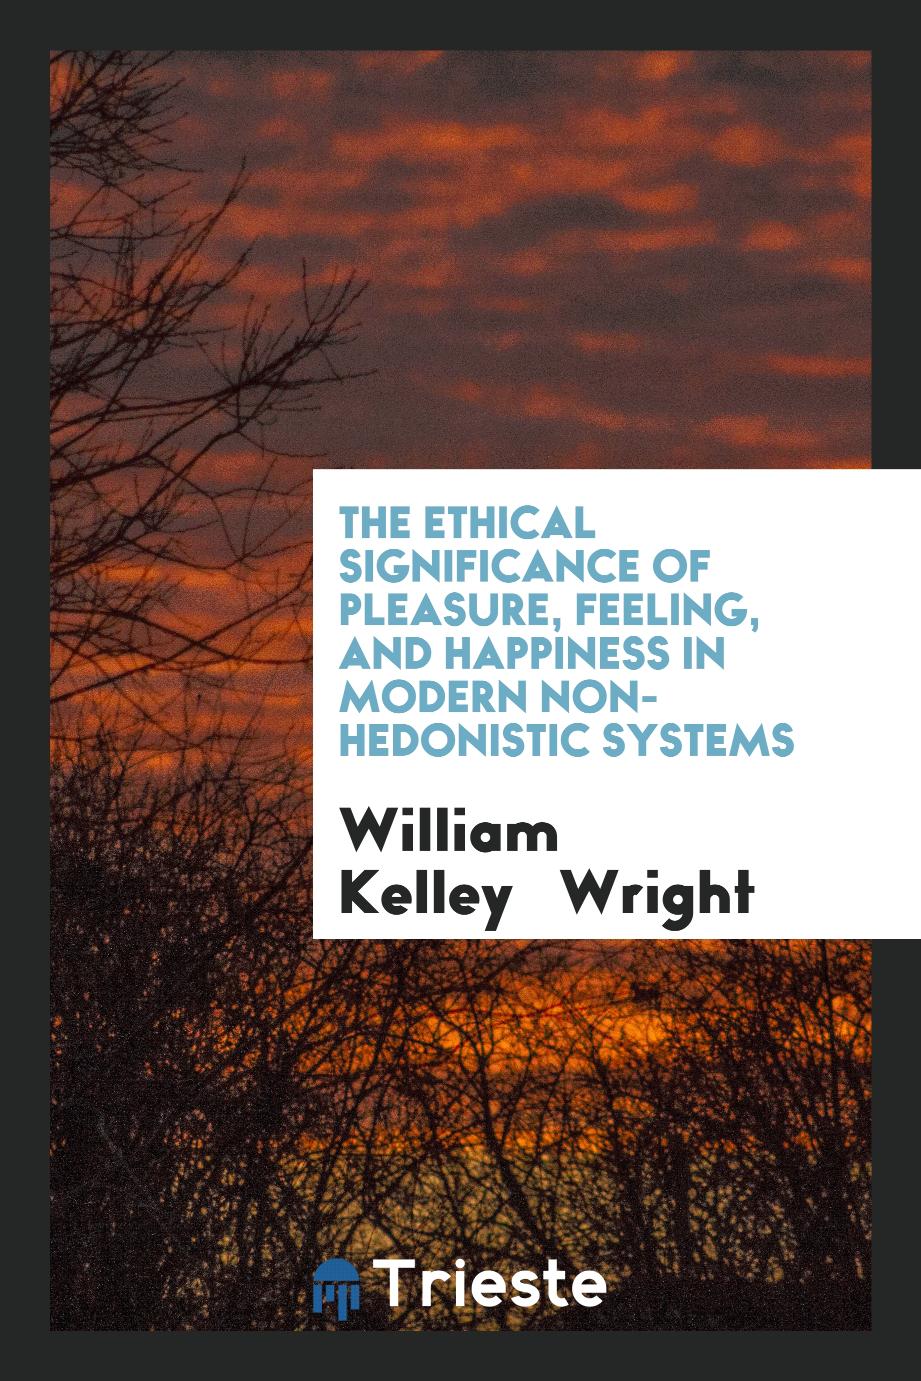 The Ethical Significance of Pleasure, Feeling, and Happiness in Modern Non-Hedonistic Systems